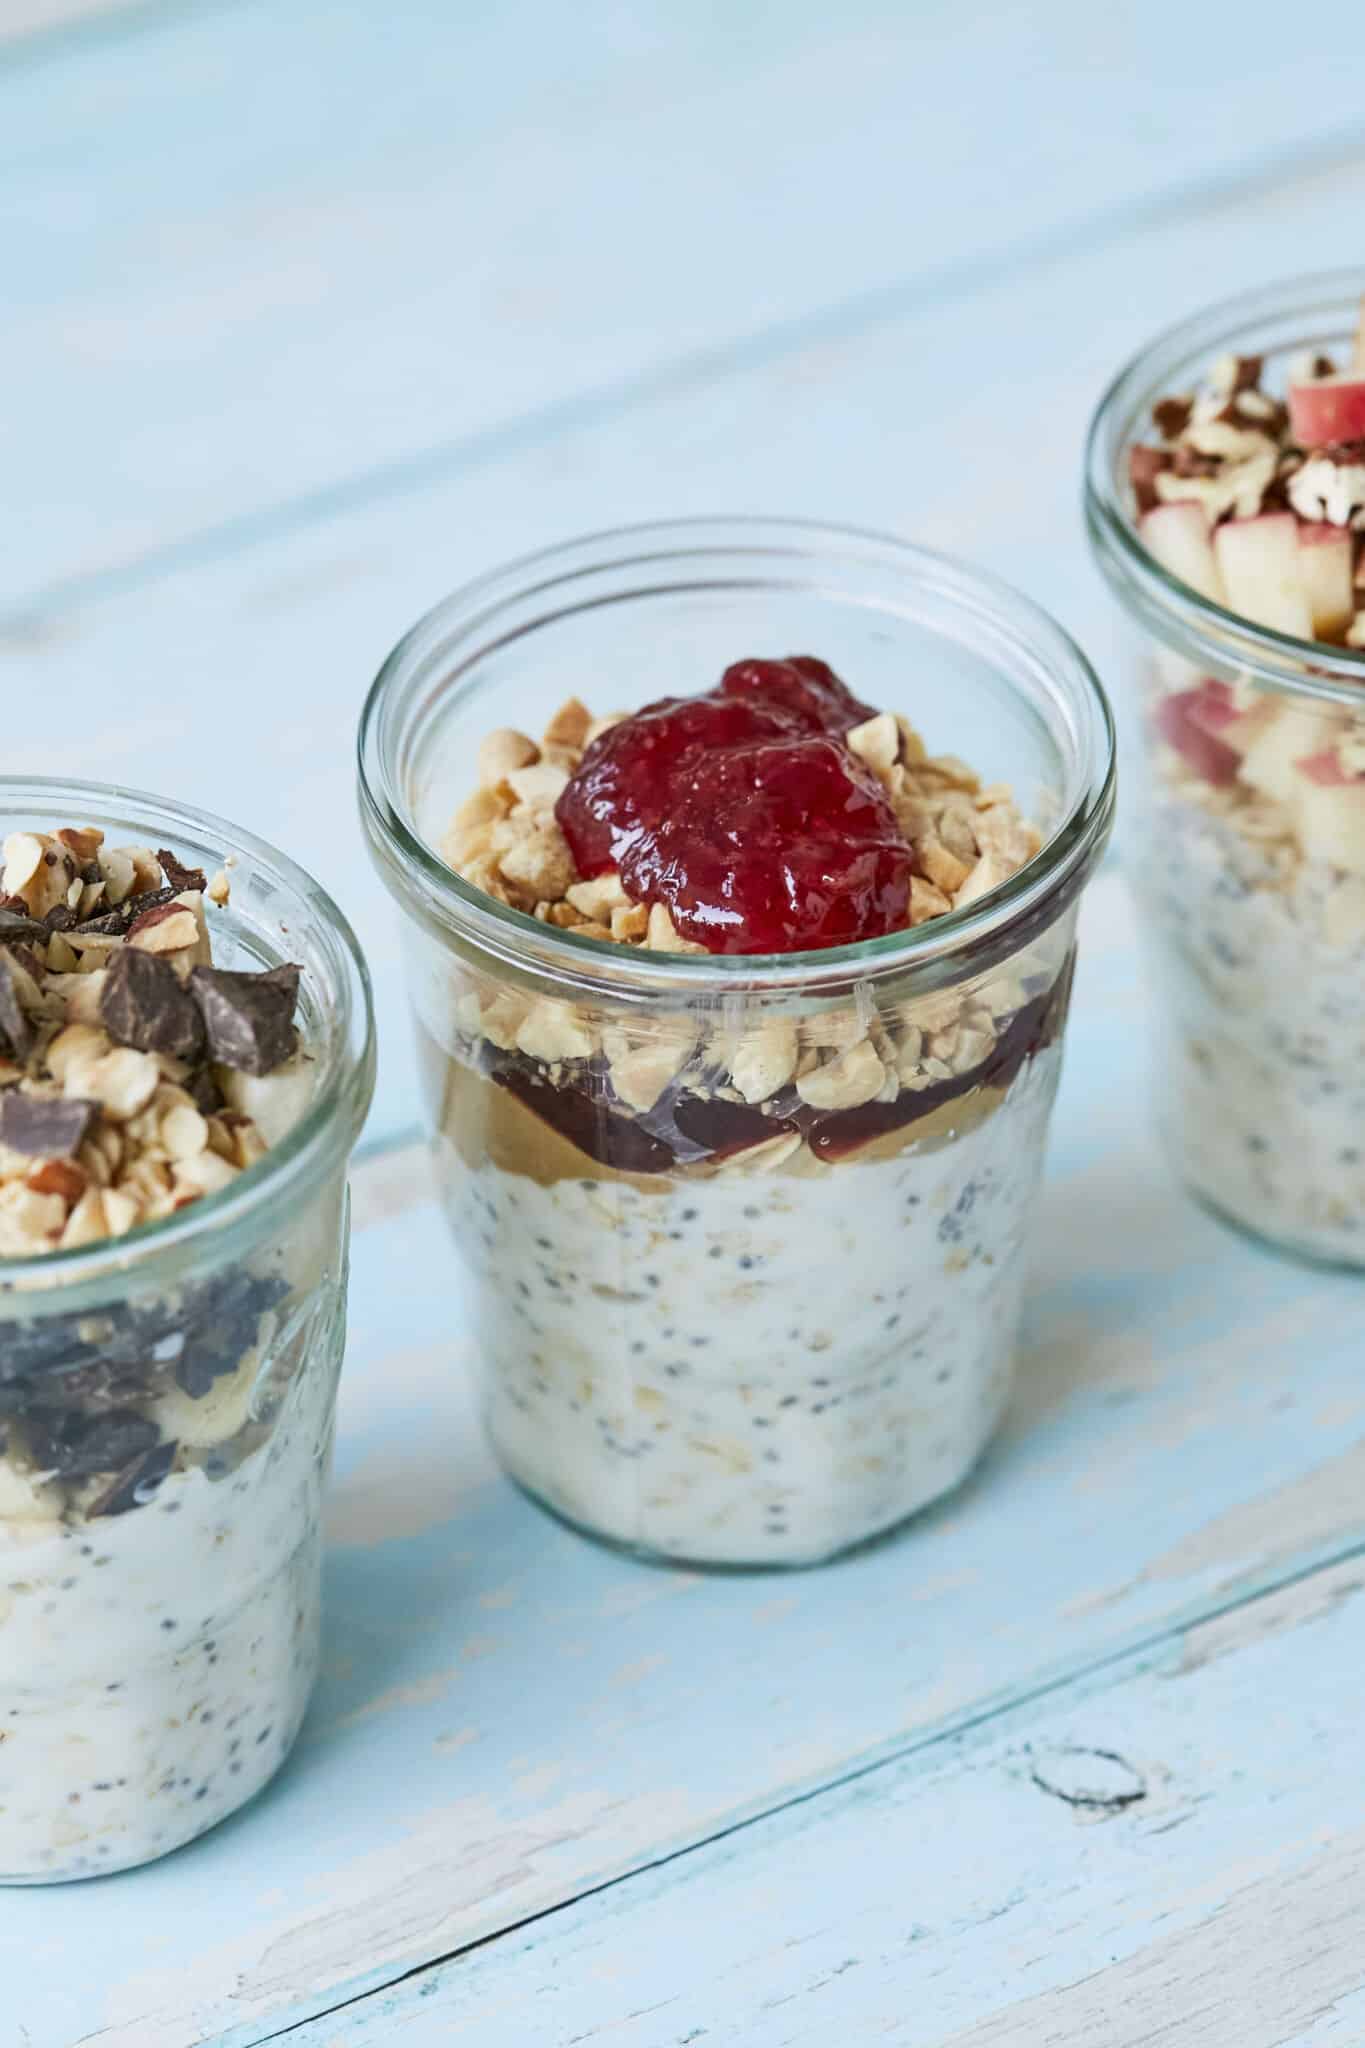 An additional sideview of the 3 jars of Overnight Oats so you can see the layers of ingredients in glass jars on a blue wooden table.